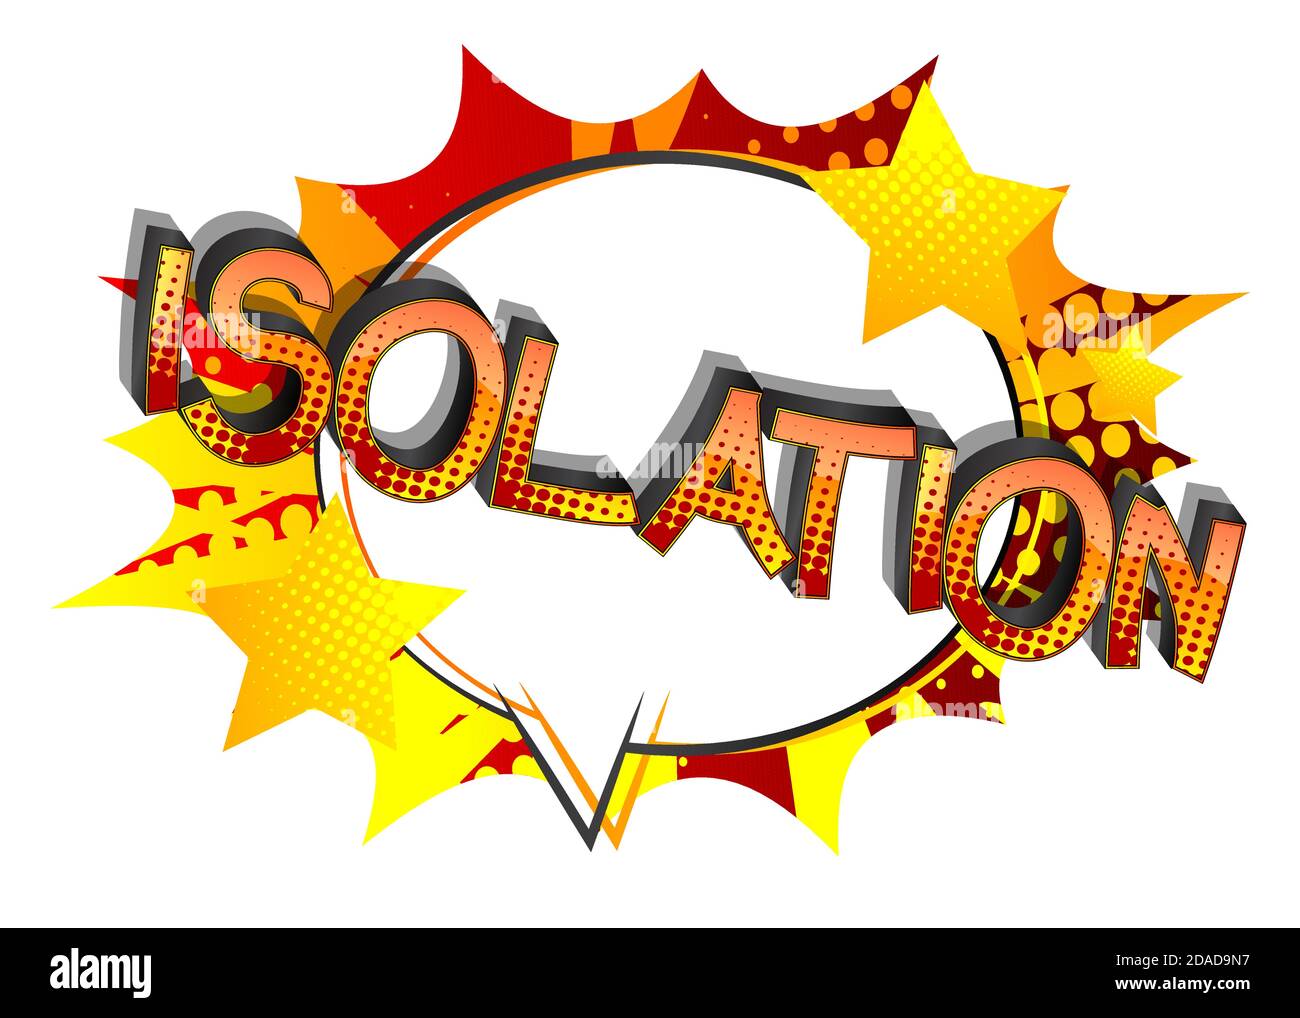 Isolation. Comic book style cartoon words on abstract colorful comics background. Stock Vector